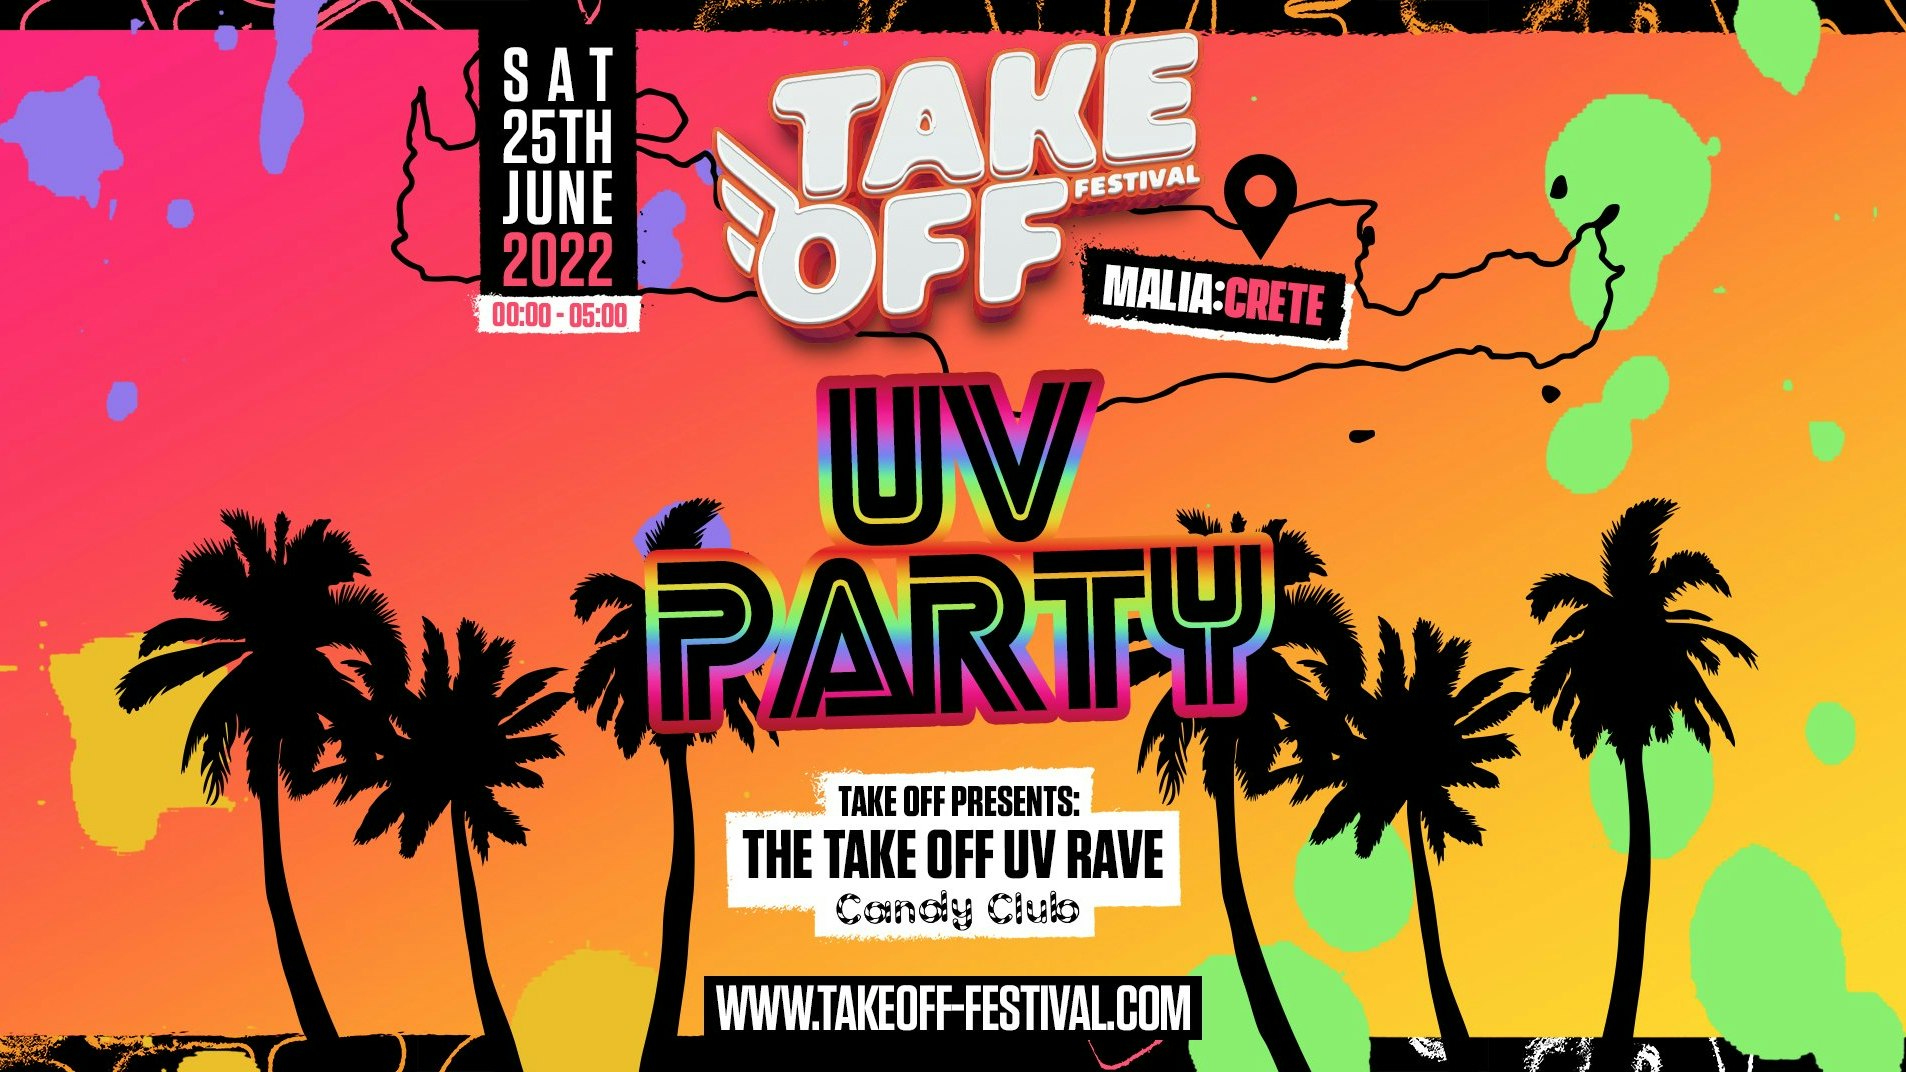 Take Off Presents: UV Paint Party at Candy Club €5! (TONIGHT!)